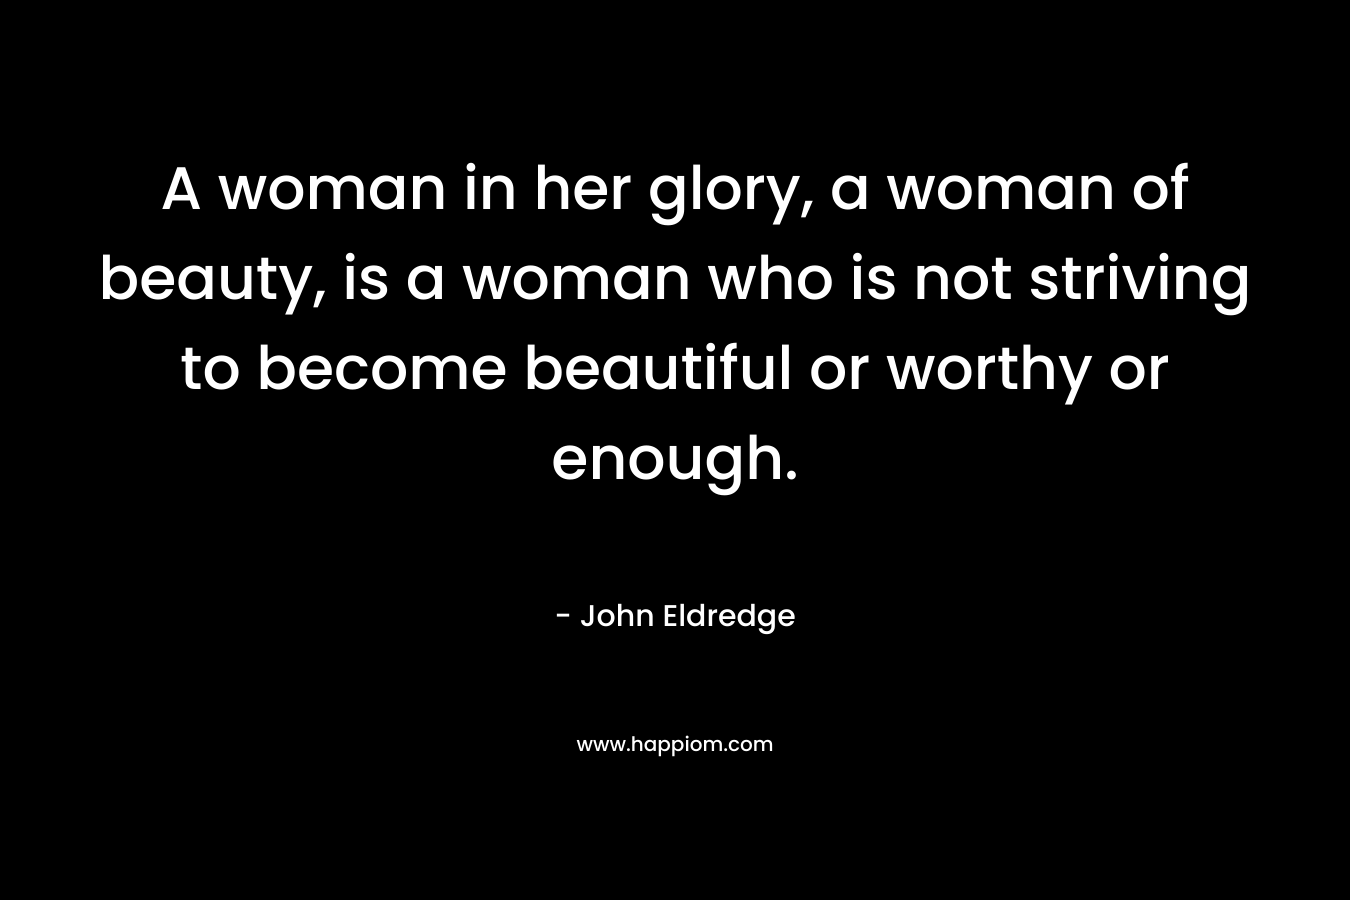 A woman in her glory, a woman of beauty, is a woman who is not striving to become beautiful or worthy or enough. – John Eldredge